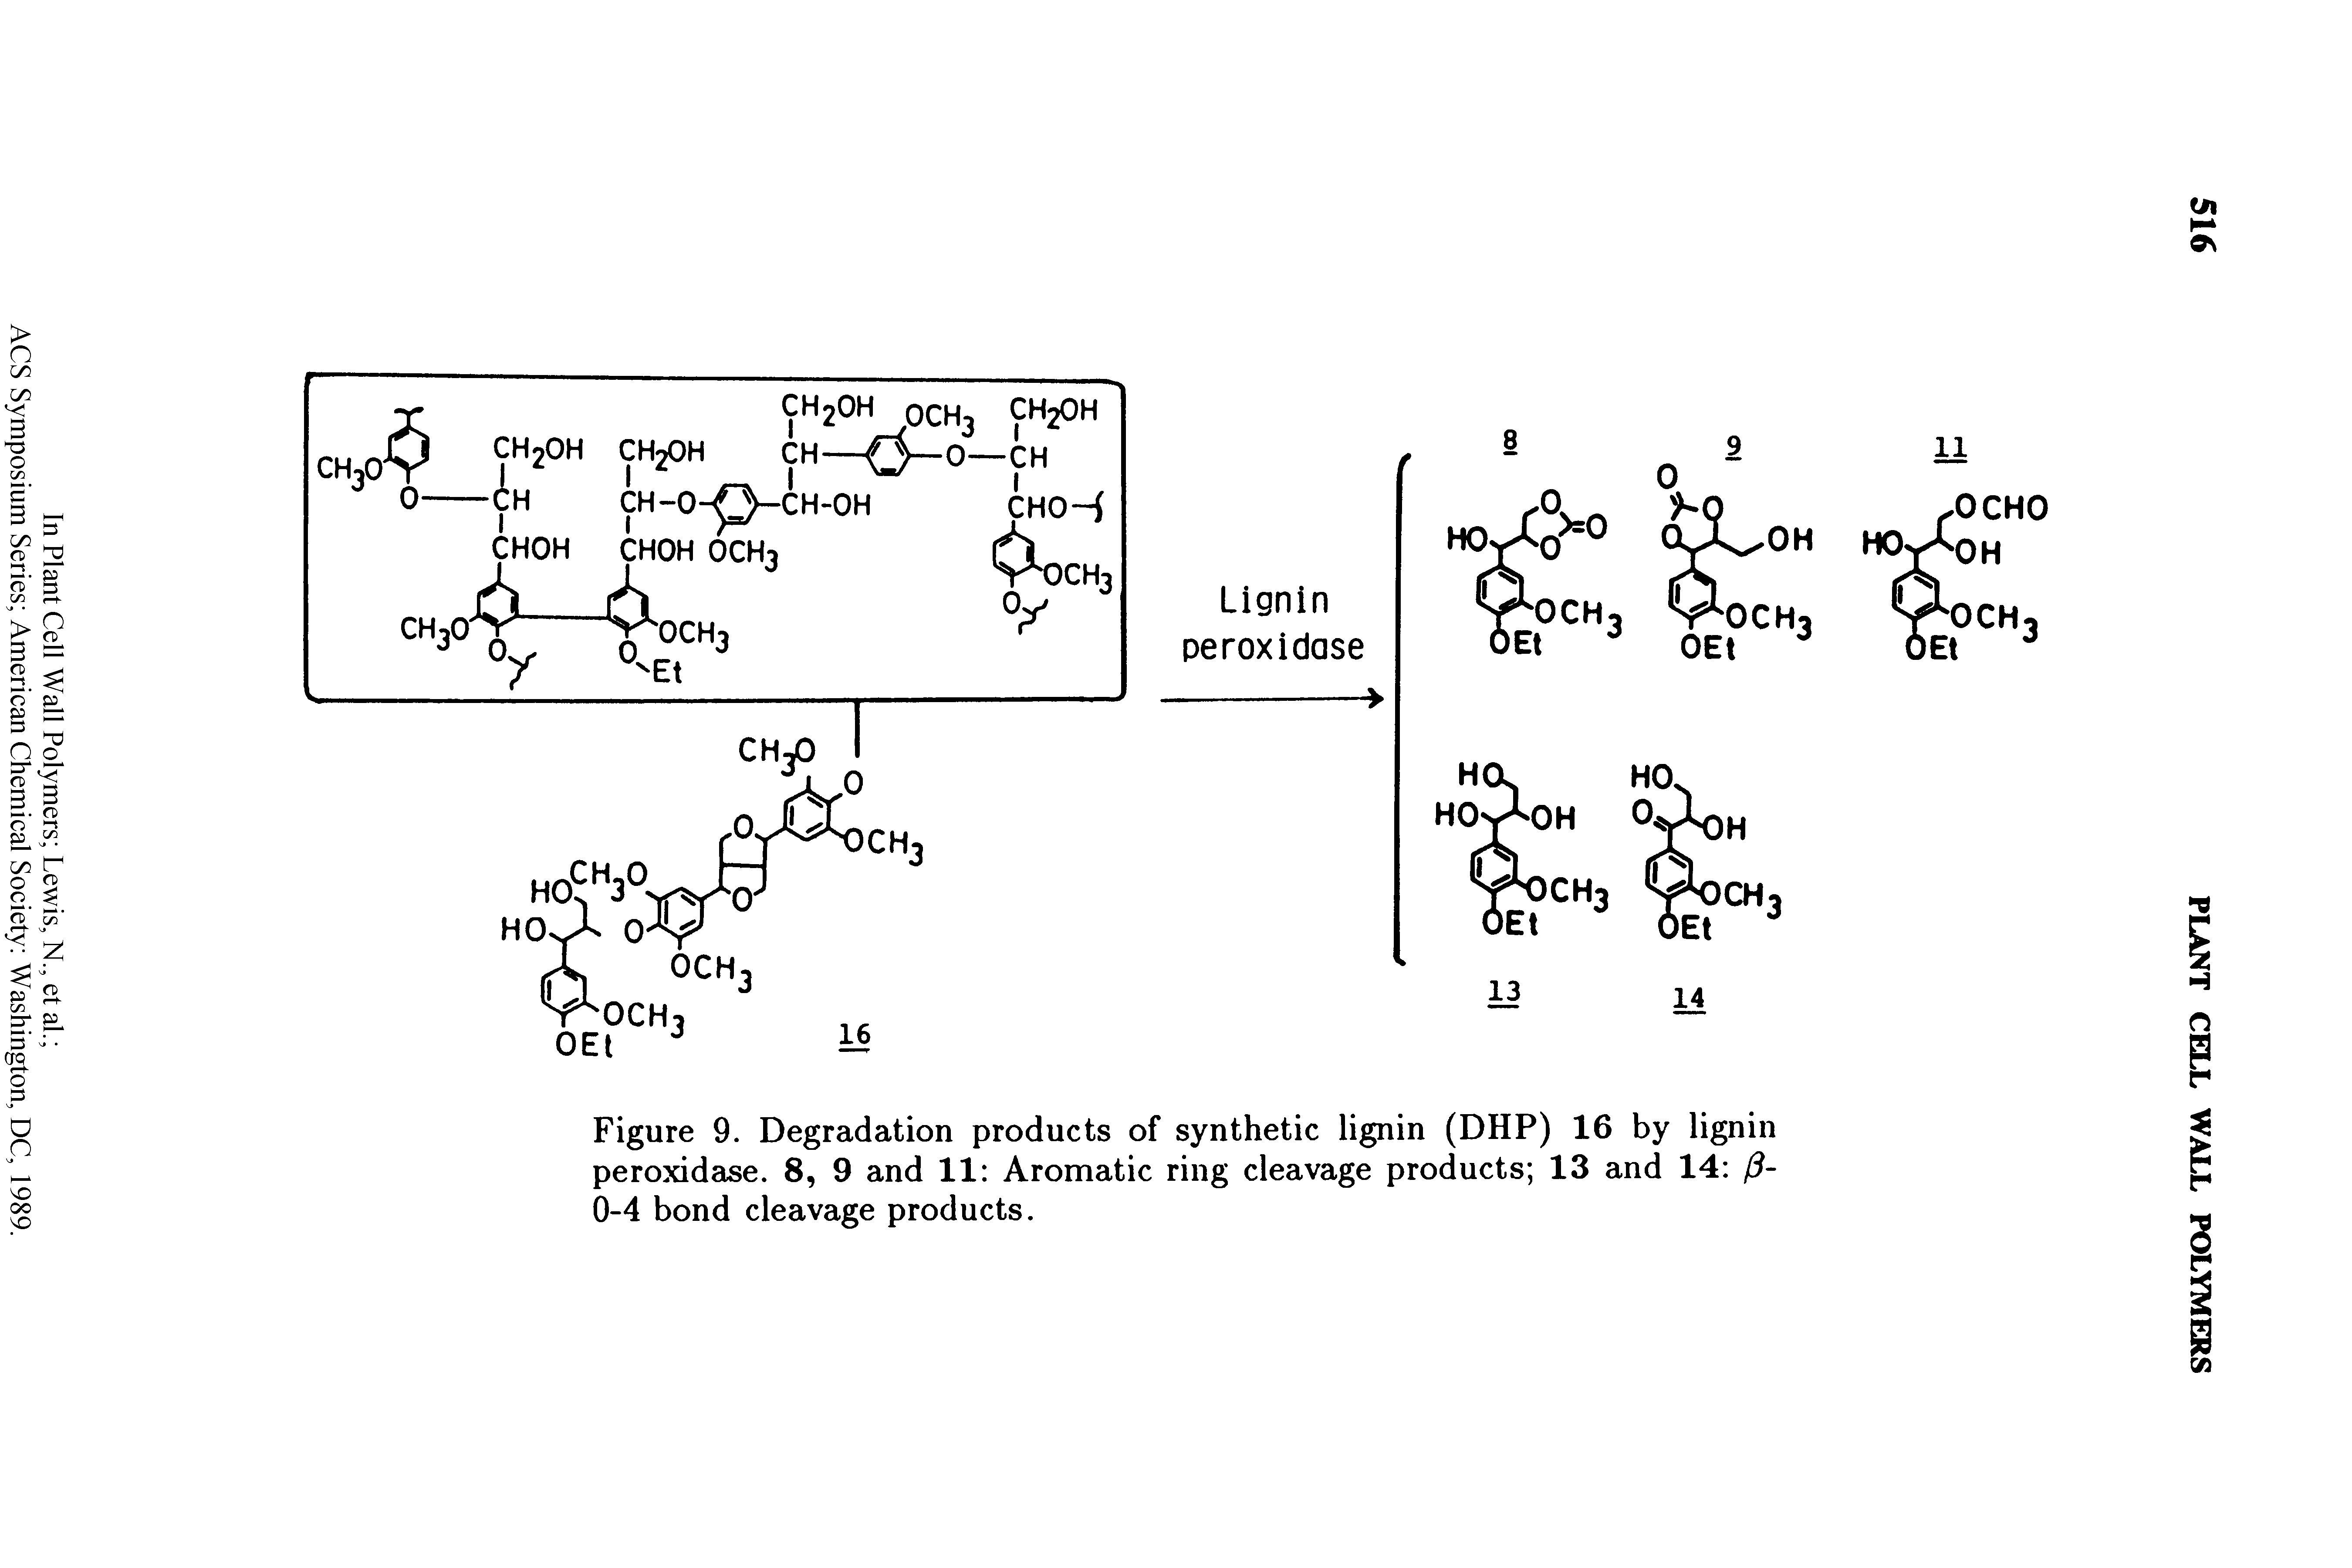 Figure 9. Degradation products of synthetic lignin (DHP) 16 by lignin peroxidase. 8, 9 and 11 Aromatic ring cleavage products 13 and 14 / -0-4 bond cleavage products.